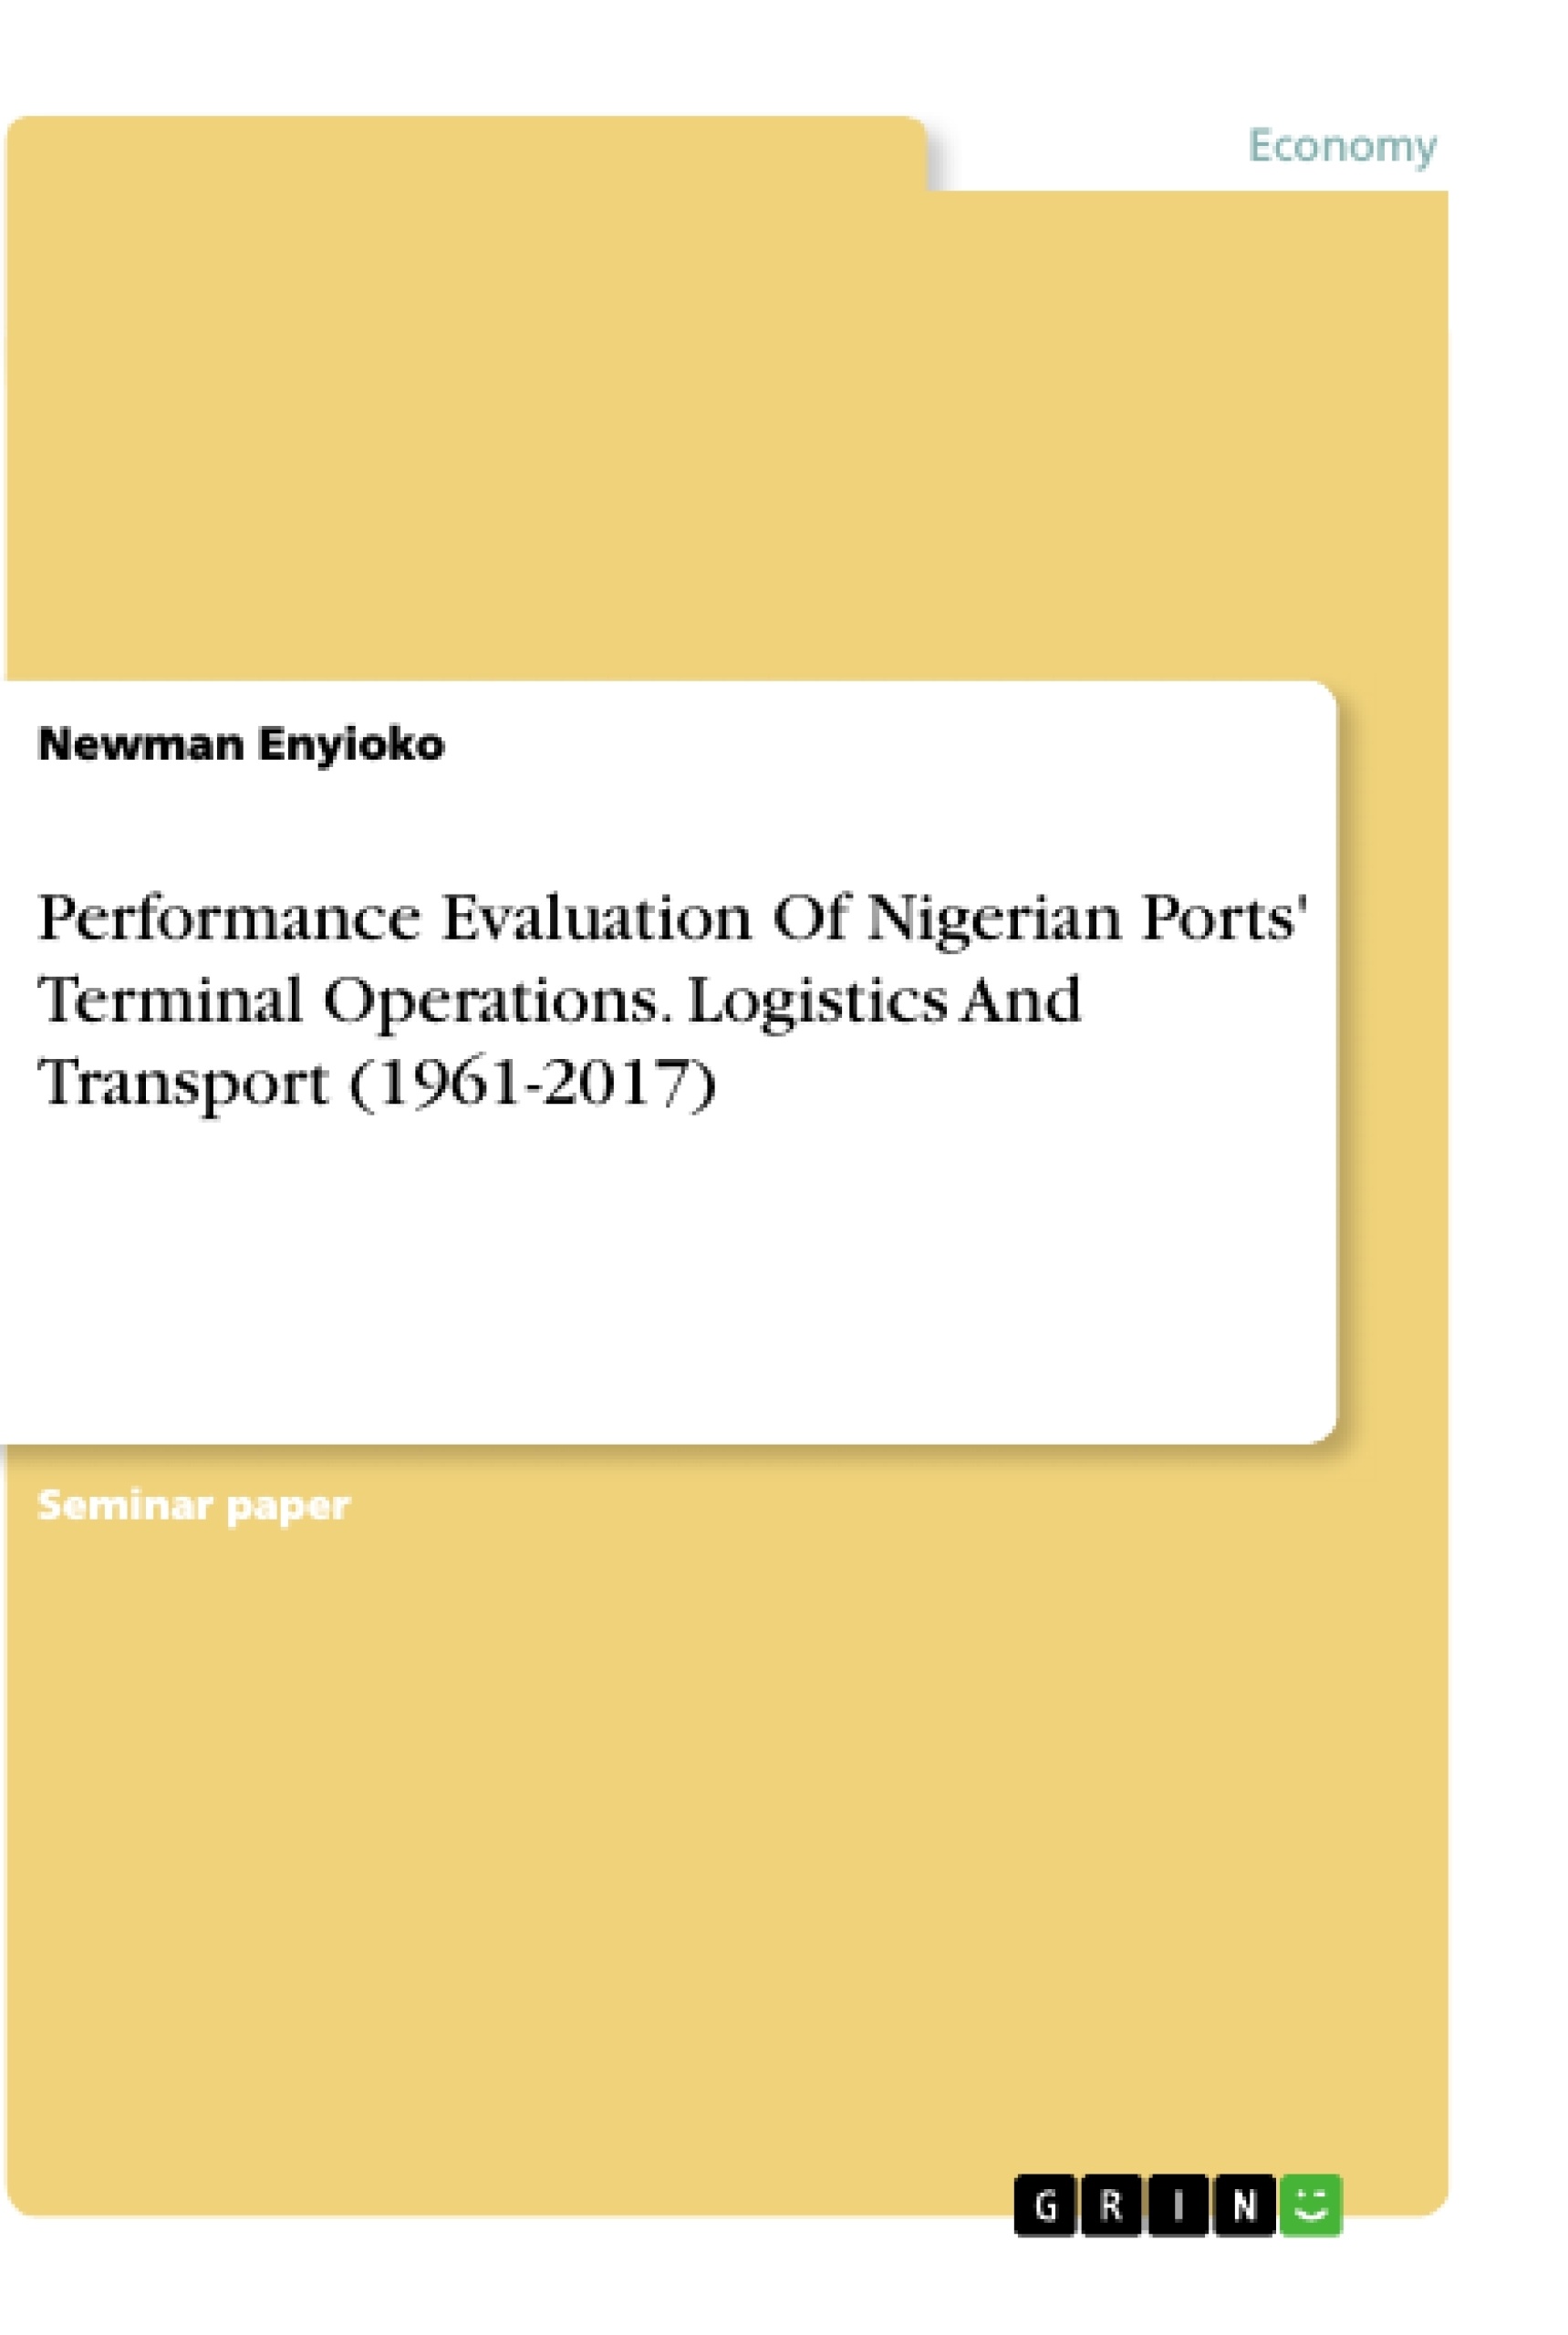 Title: Performance Evaluation Of Nigerian Ports' Terminal Operations. Logistics And Transport (1961-2017)